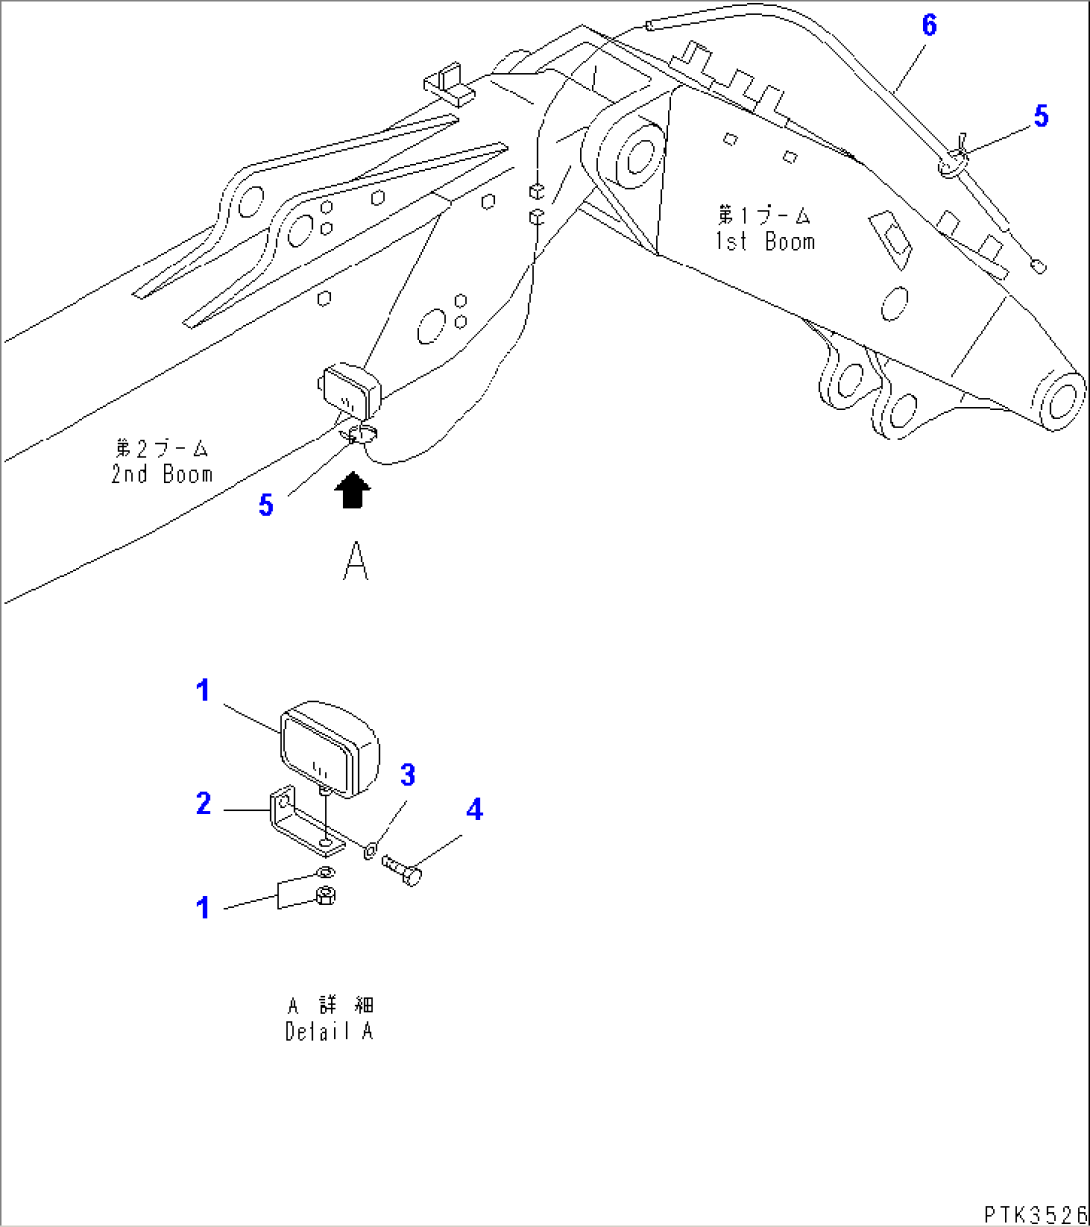 WIRING (WORK LAMP) (FOR 2-PIECE BOOM)